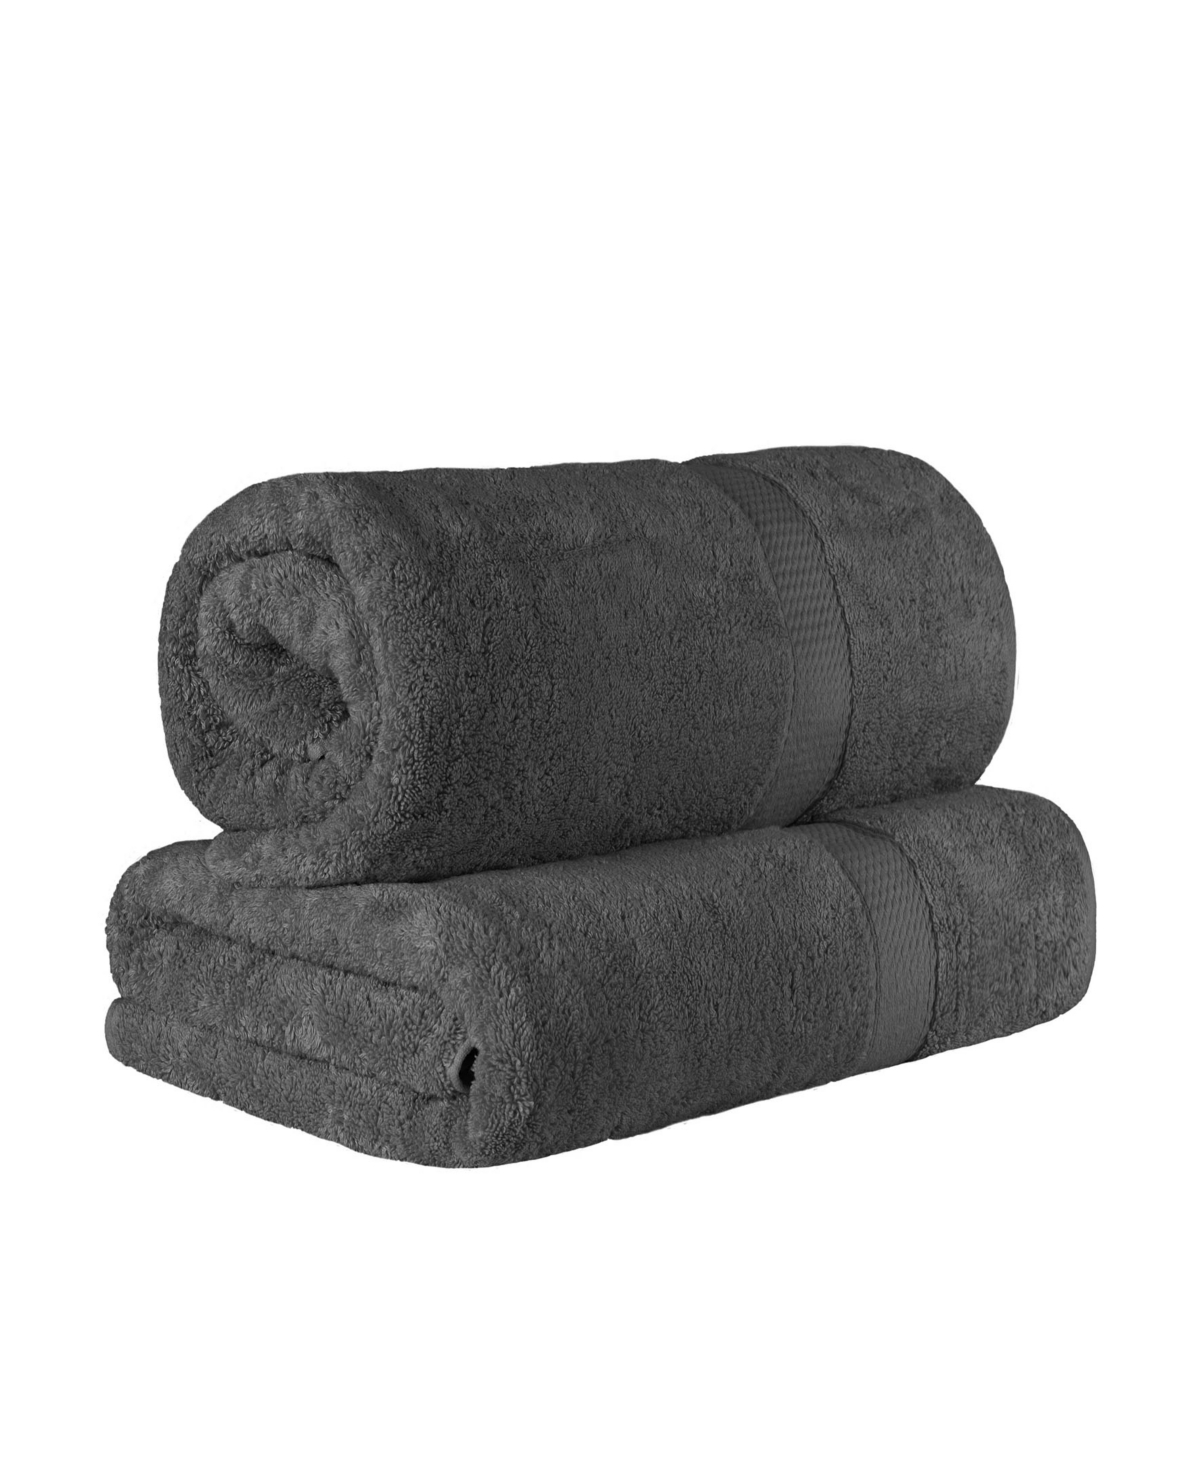 Superior Highly Absorbent 2 Piece Egyptian Cotton Ultra Plush Solid Bath Sheet Set Bedding In Charcoal